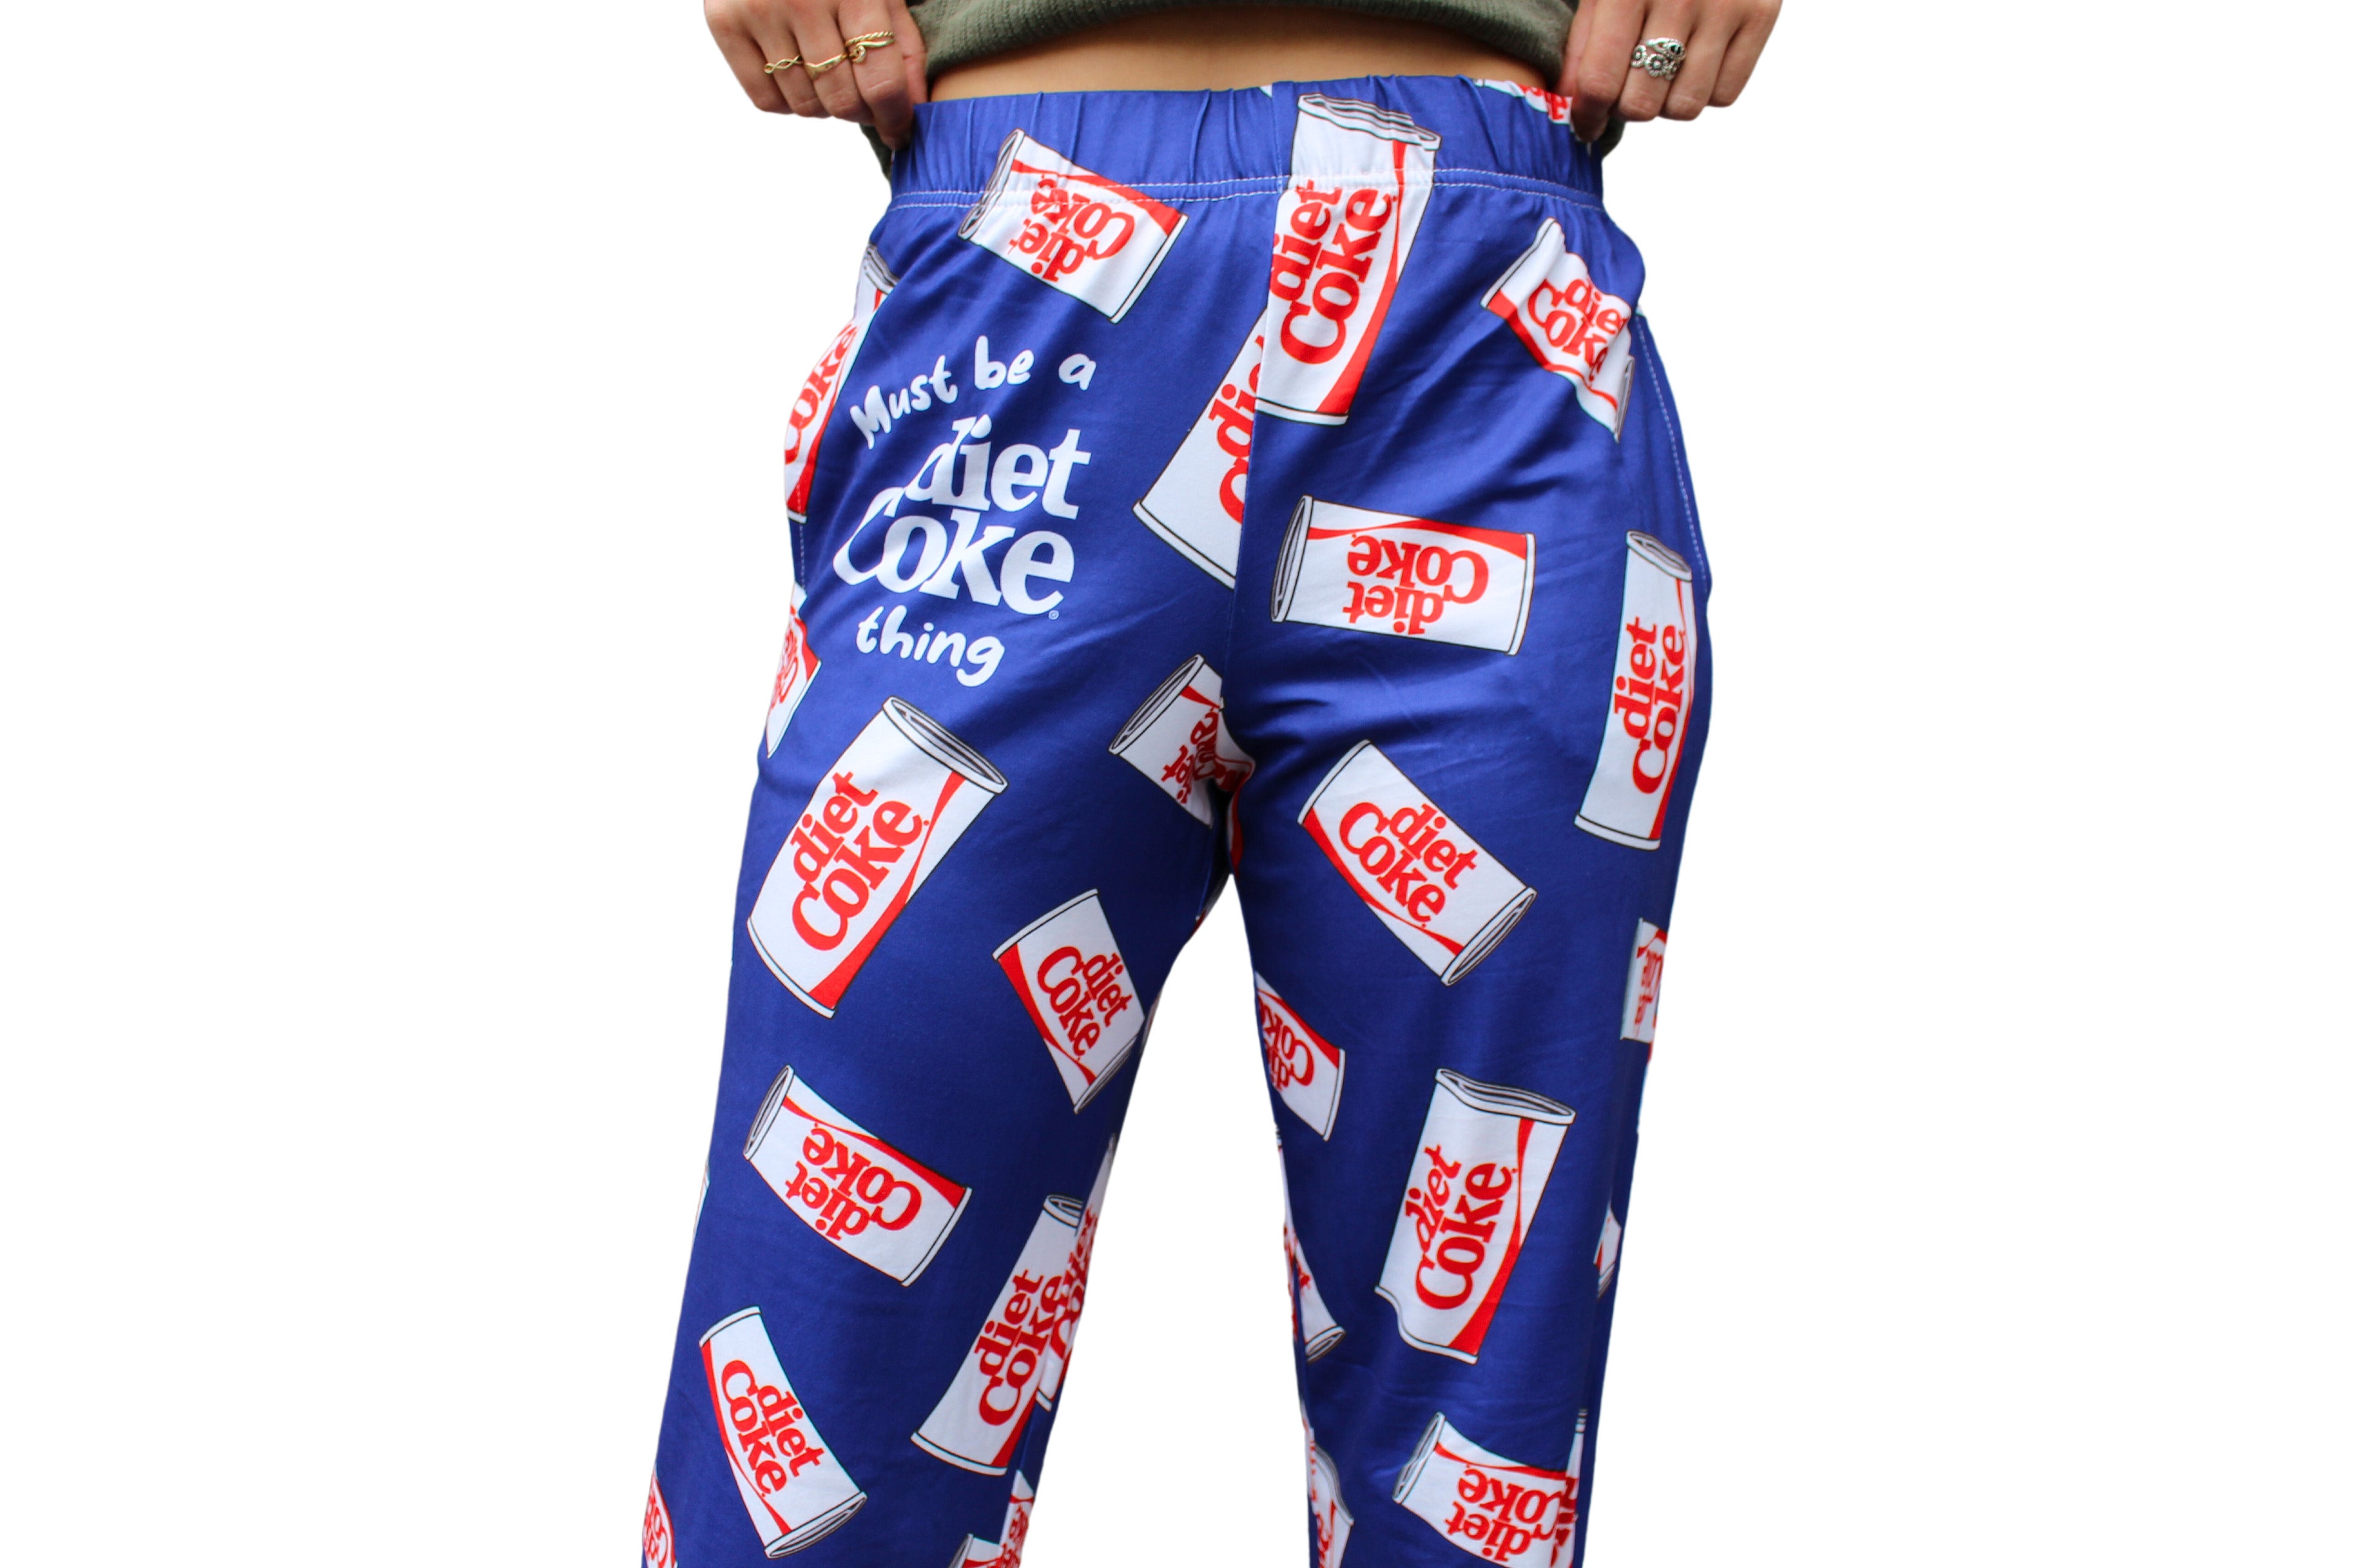 Diet Coke Pajama Lounge Pants on model close up front view